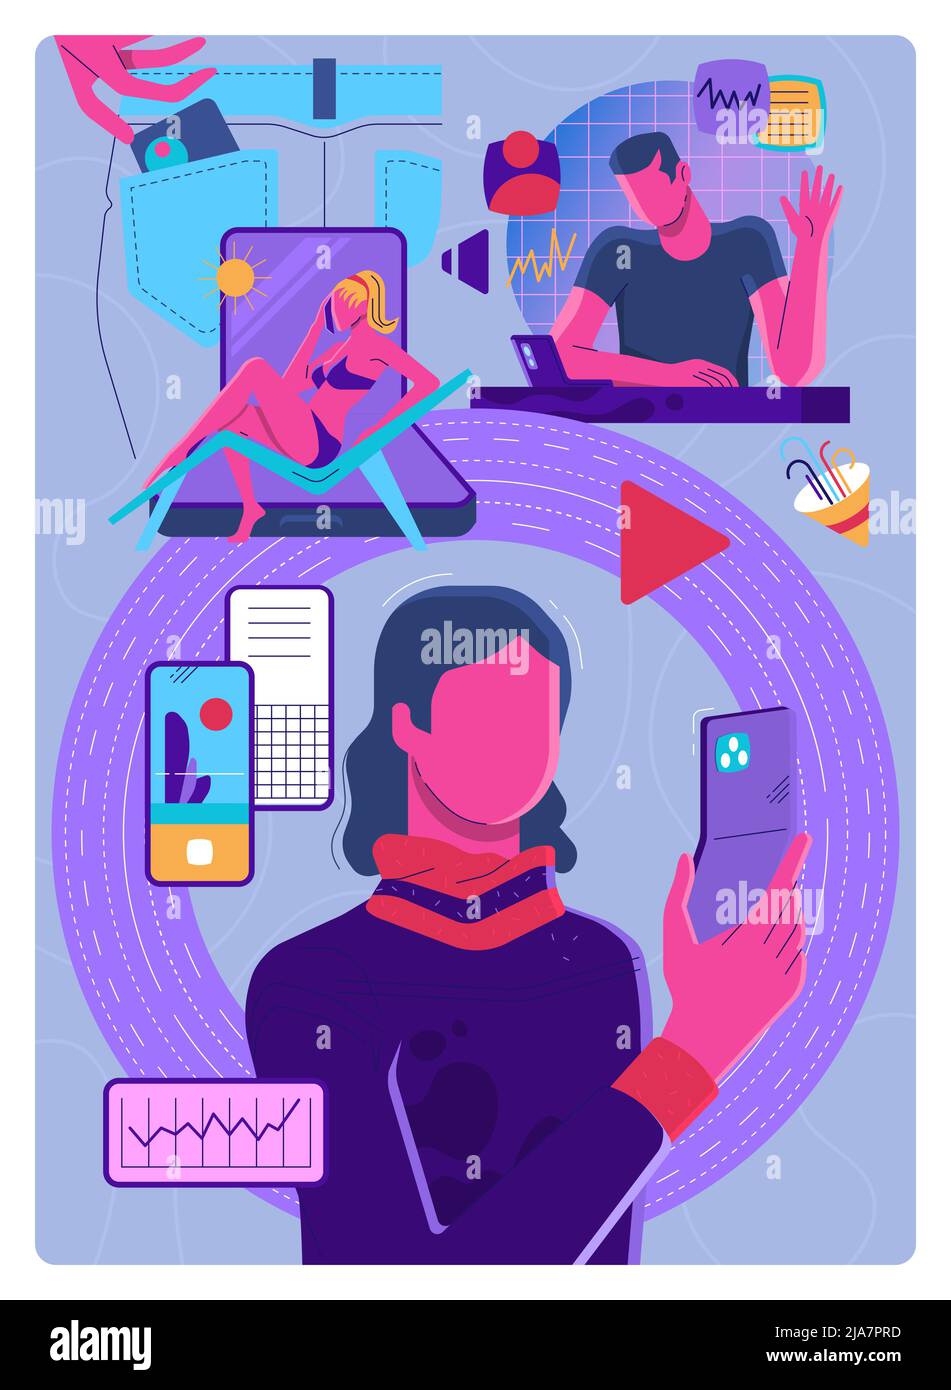 People with foldable phones, concept illustration, man and woman, beach, office, outddor location, smartphones at work leisure and communication Stock Vector